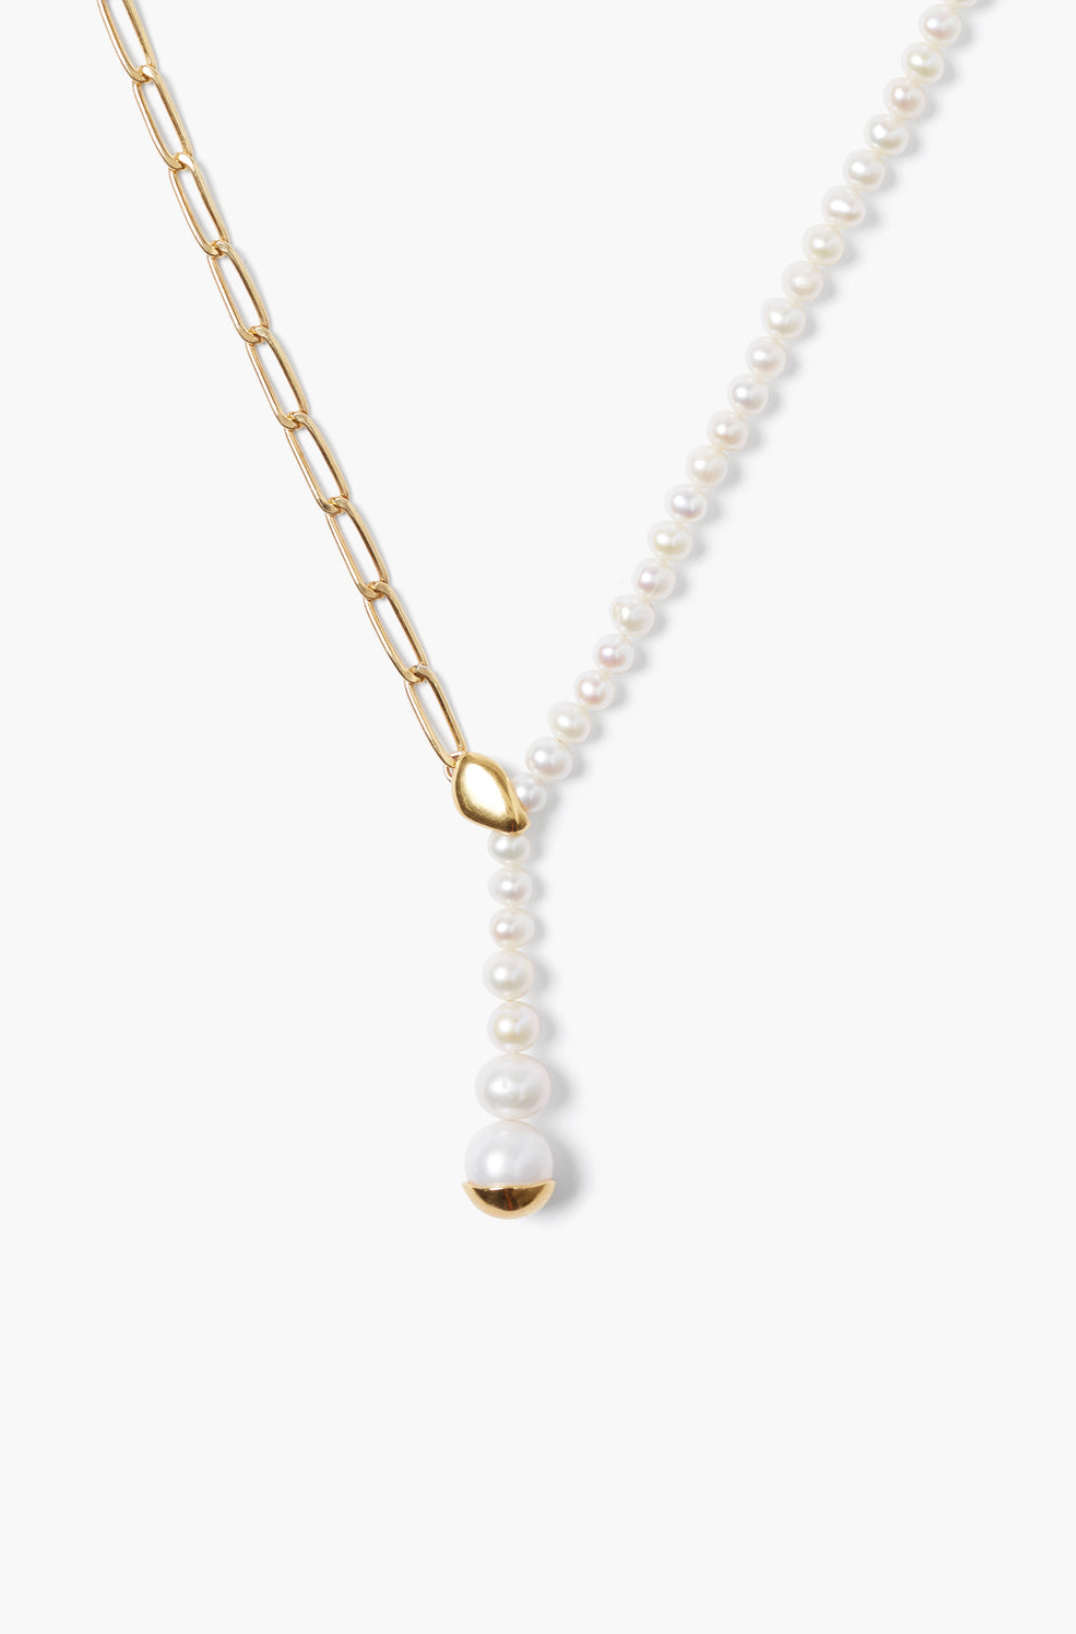 NECKLACE GOLD PEARL